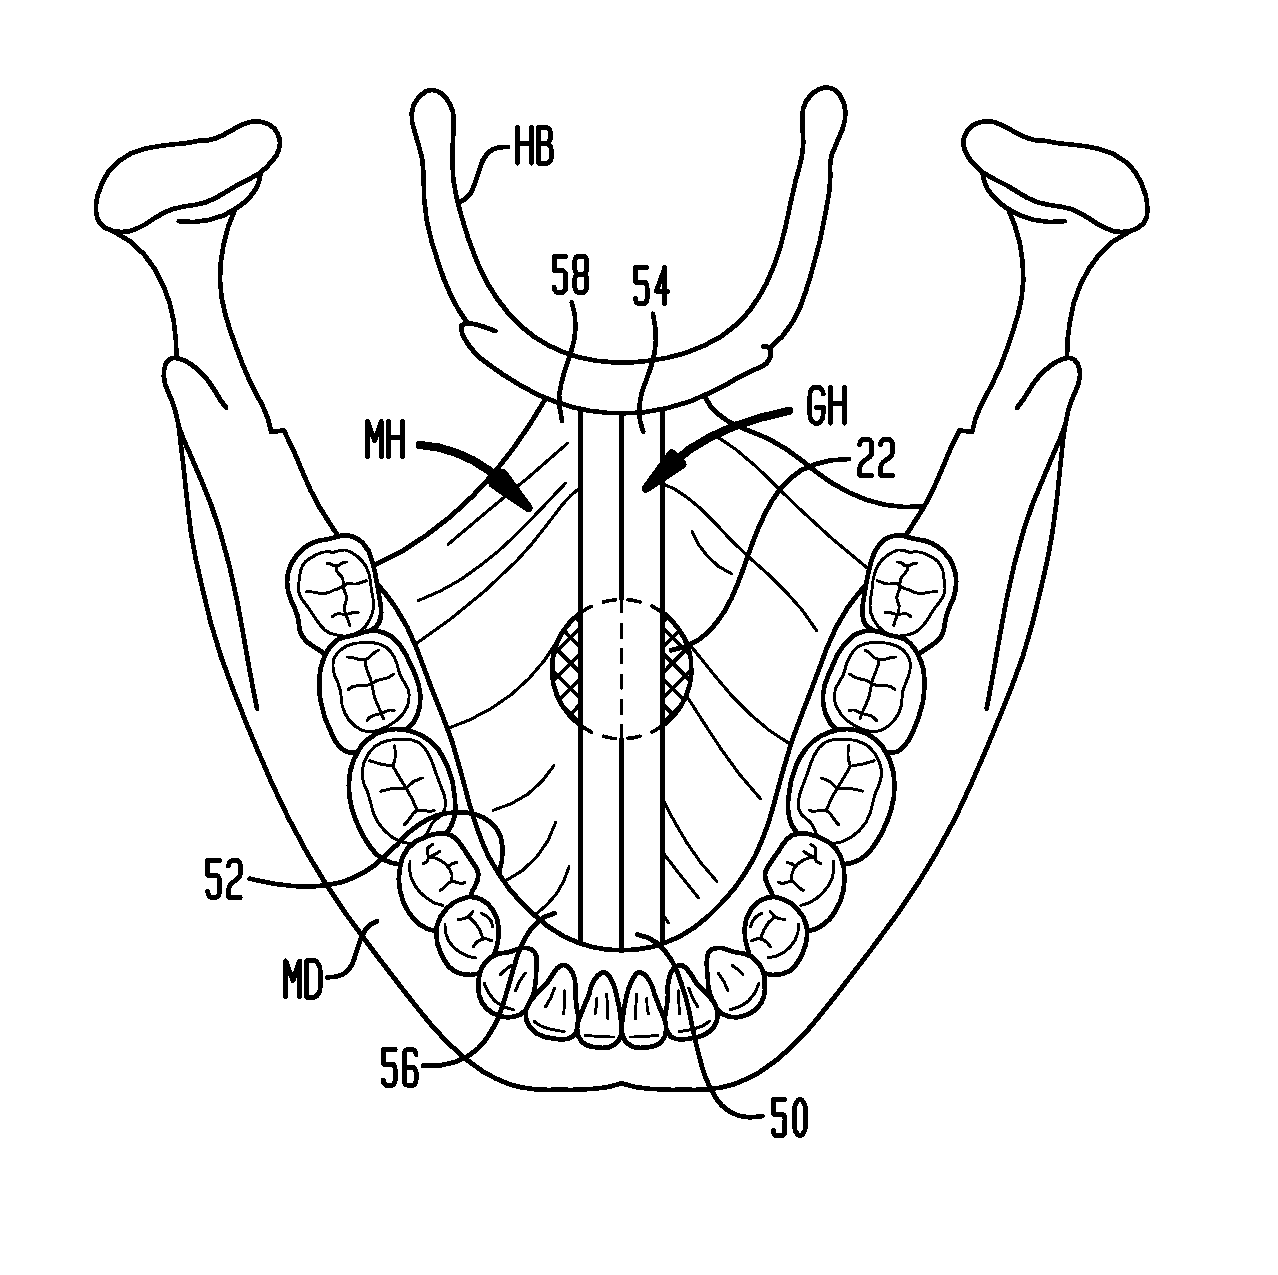 Implant systems and methods for treating obstructive sleep apnea